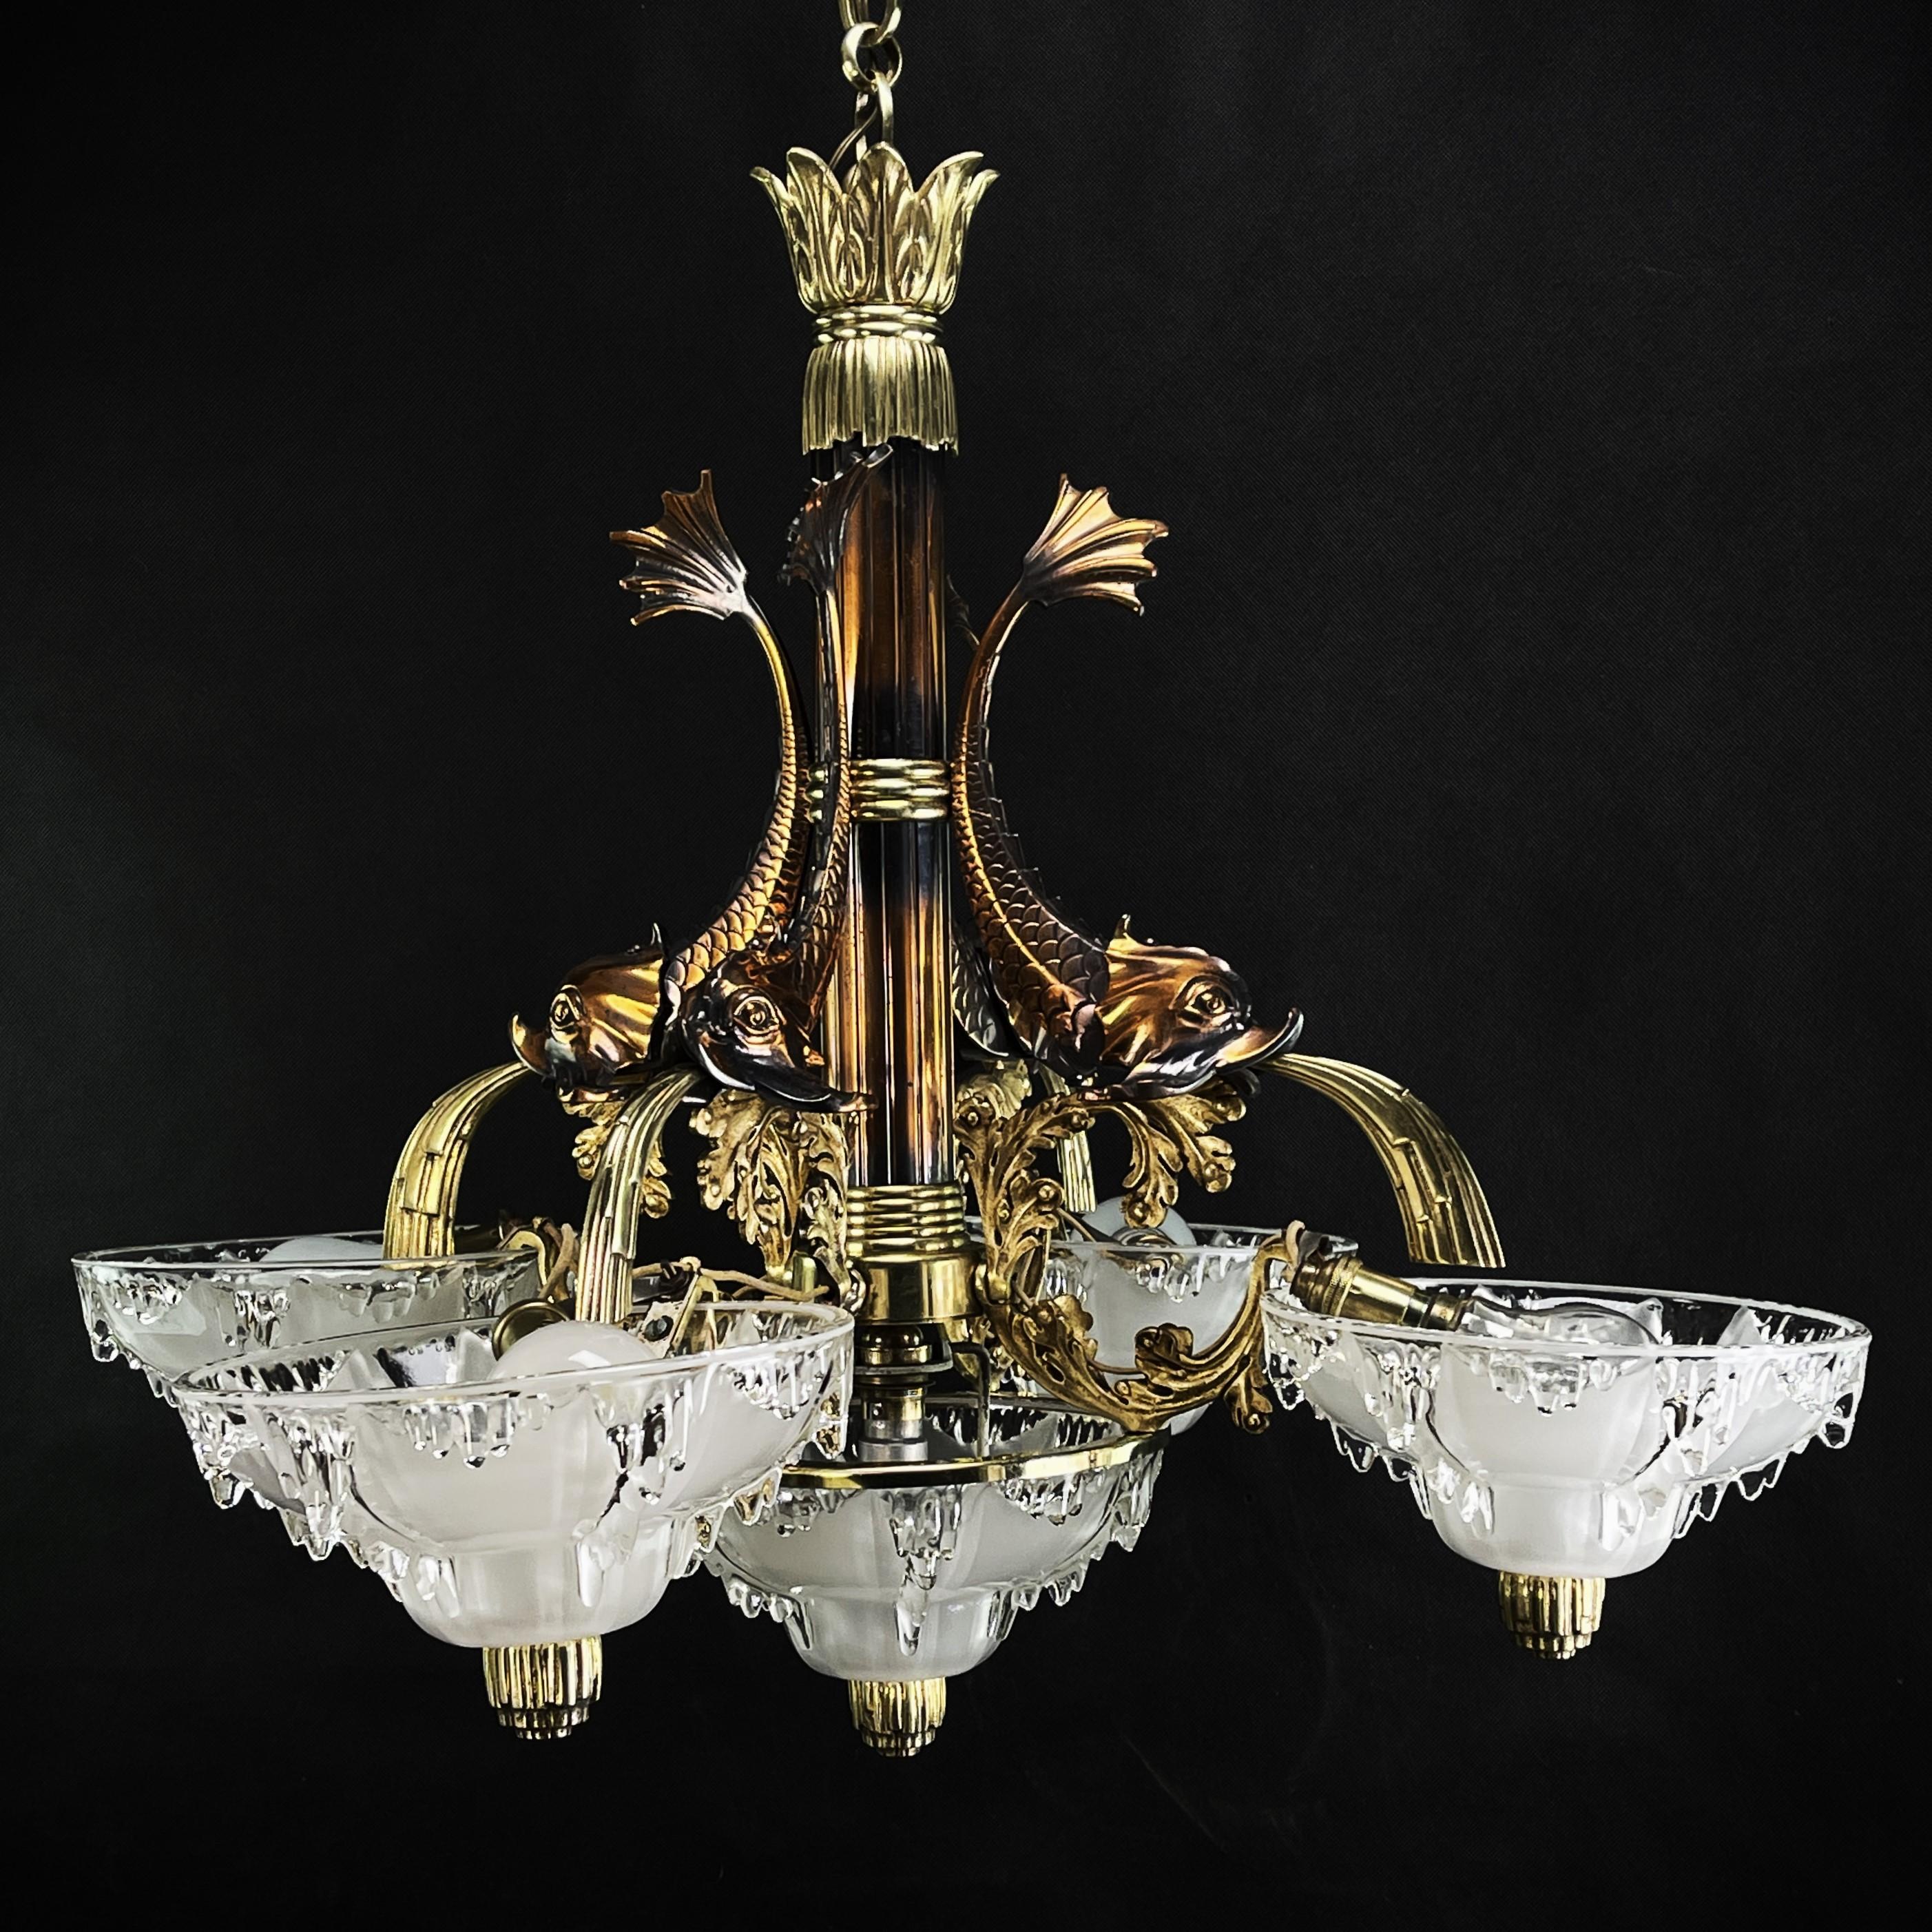 French Beautiful Art Deco Chandelier Hanging Lamp Signed M.P.,  Petitot, 1920s For Sale